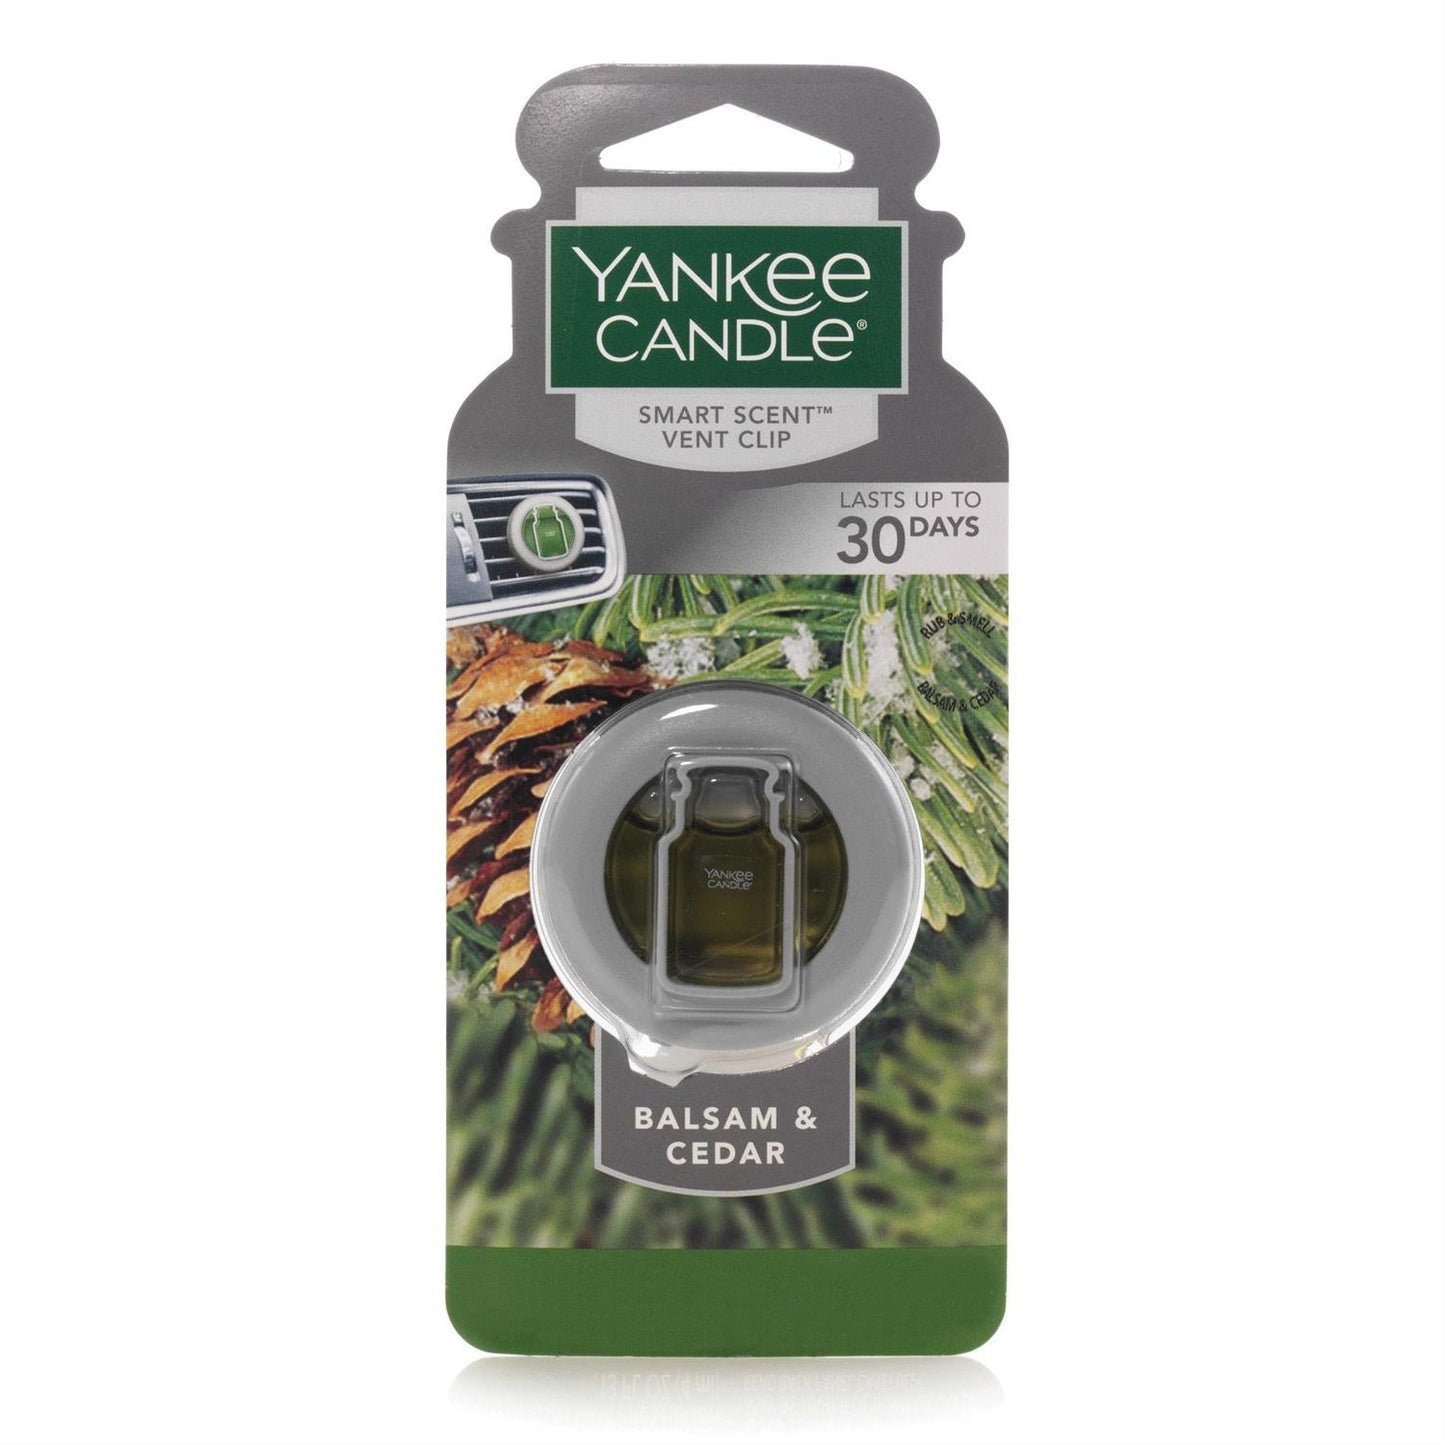 Yankee Smart Scent Car Vent Clips